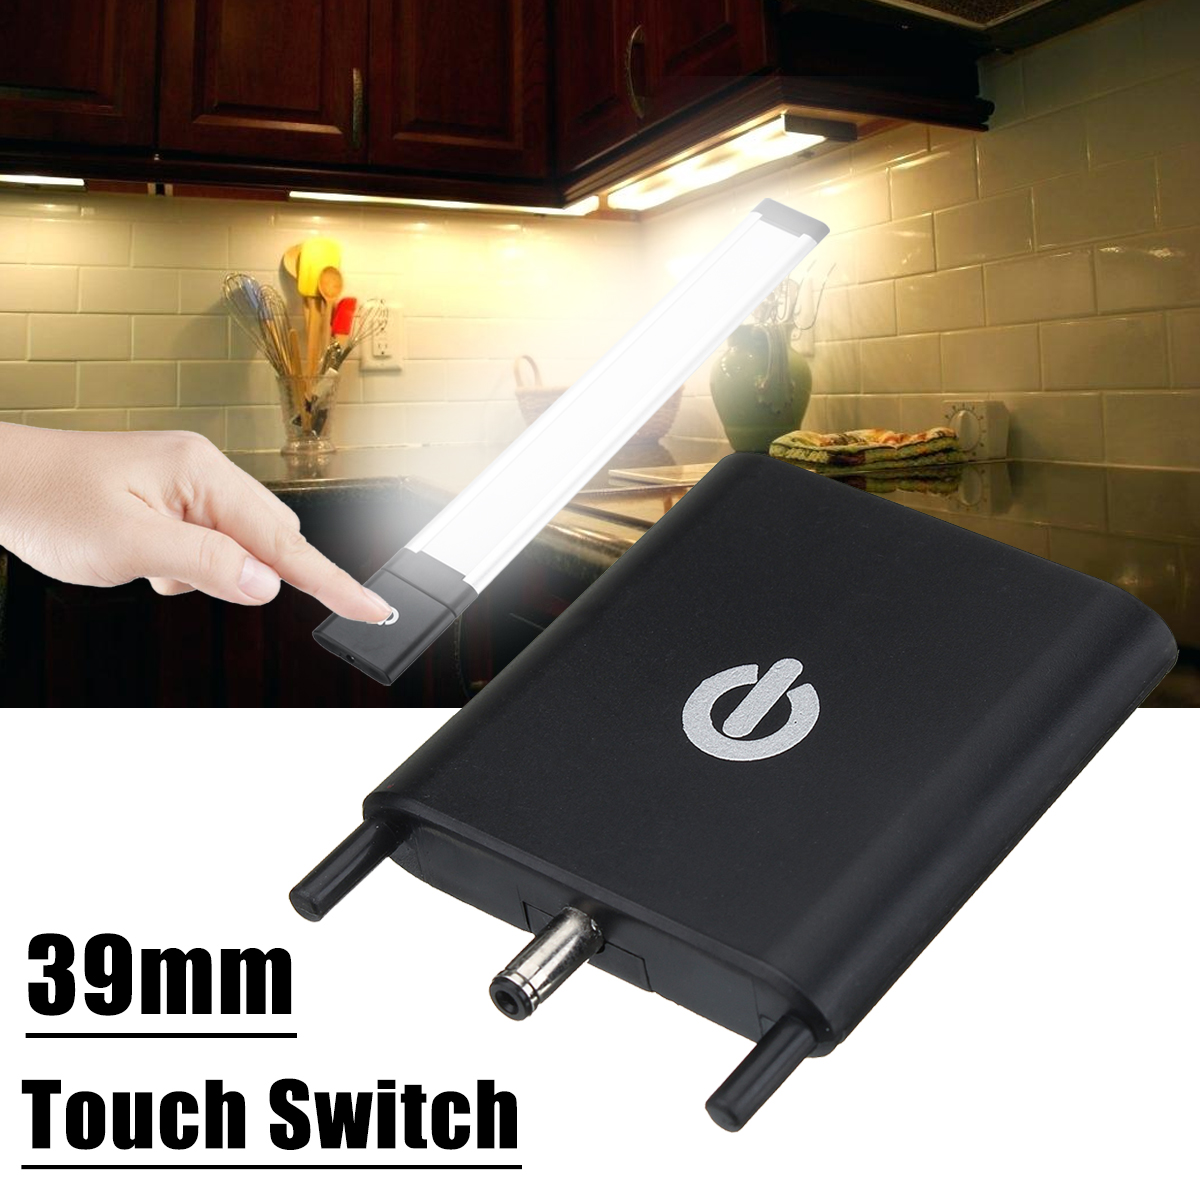 DC-12-24V-Touch-Switch-39mm-LED-Dimmer-Touch-Switch-Strip-Light-Lamp-Switch-1320449-1